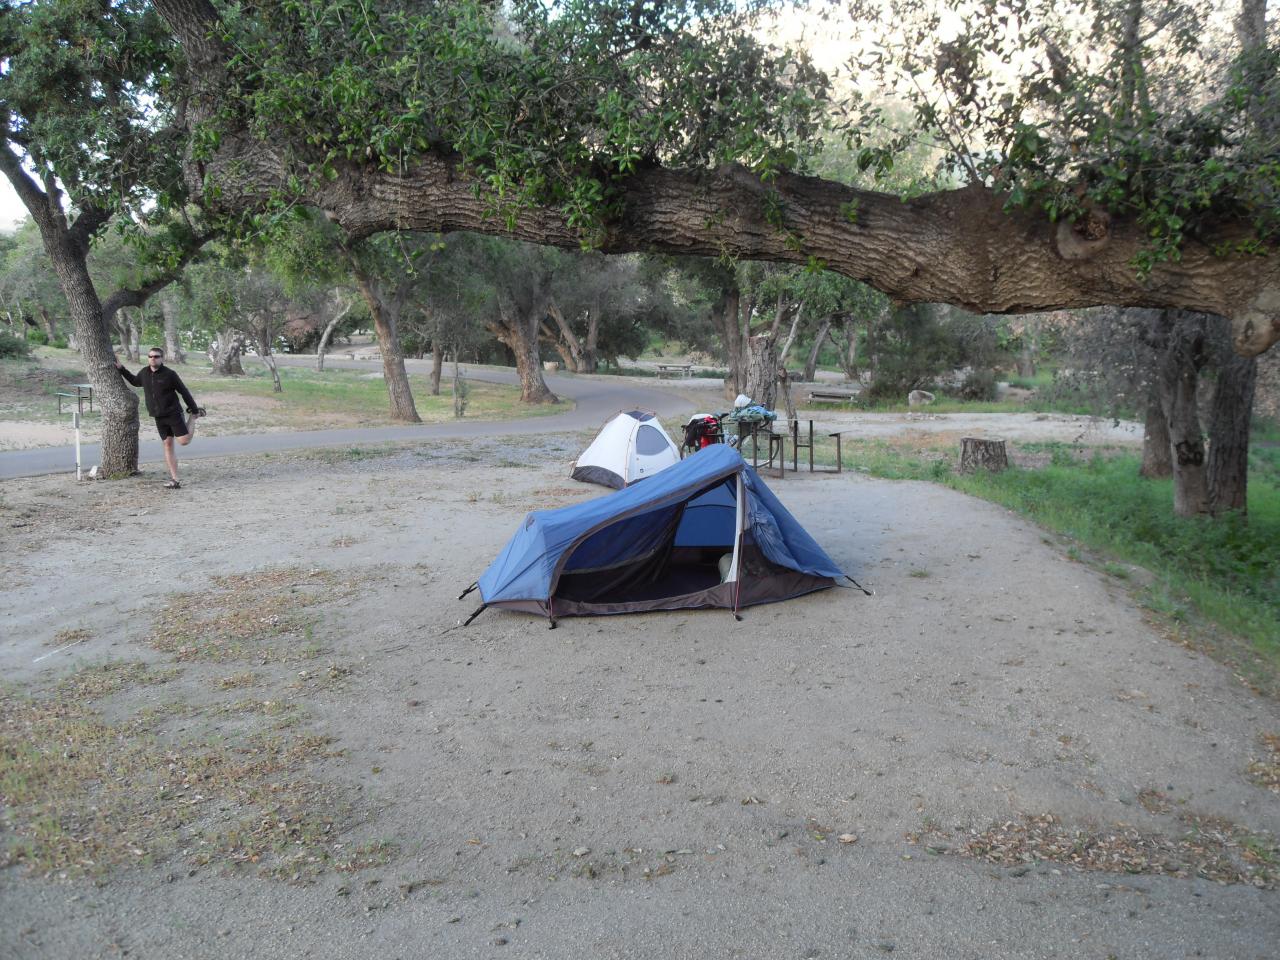 Camping the first night at Ma Tar Awa campground near Viejas after riding 65 miles uphill